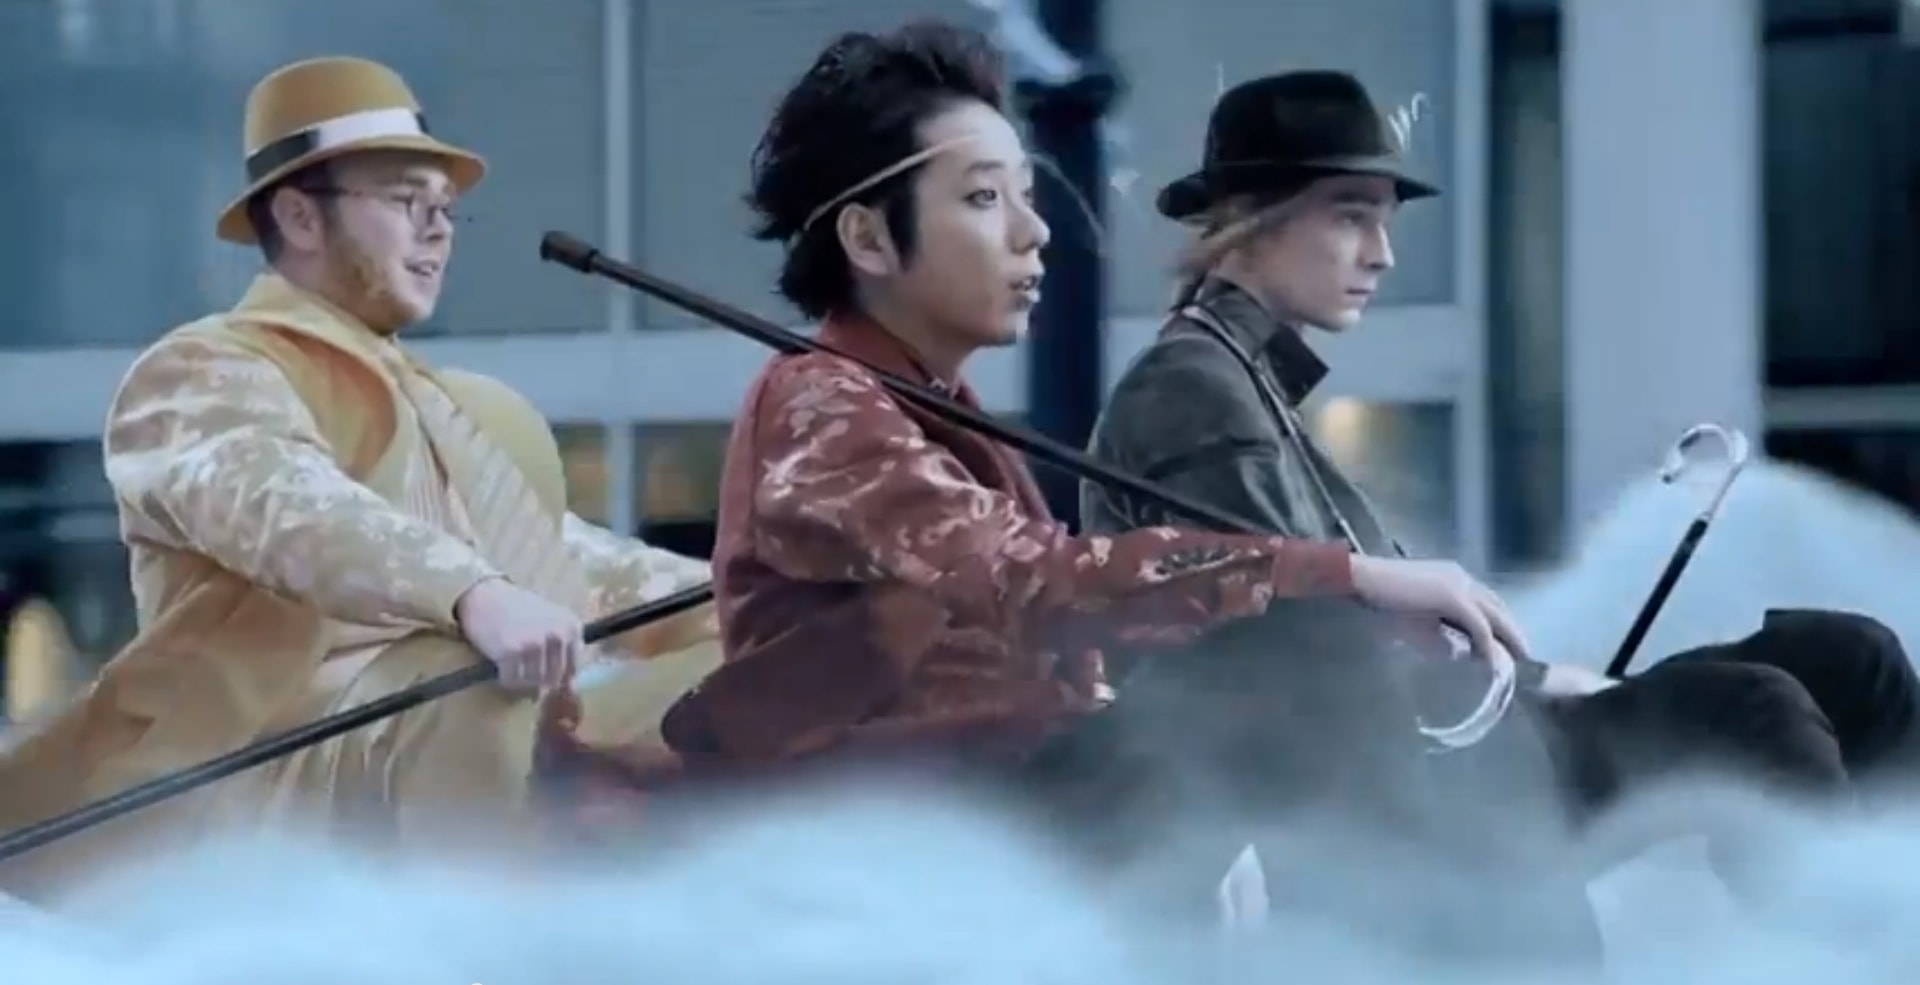 Asian woman in nissan commercial #7